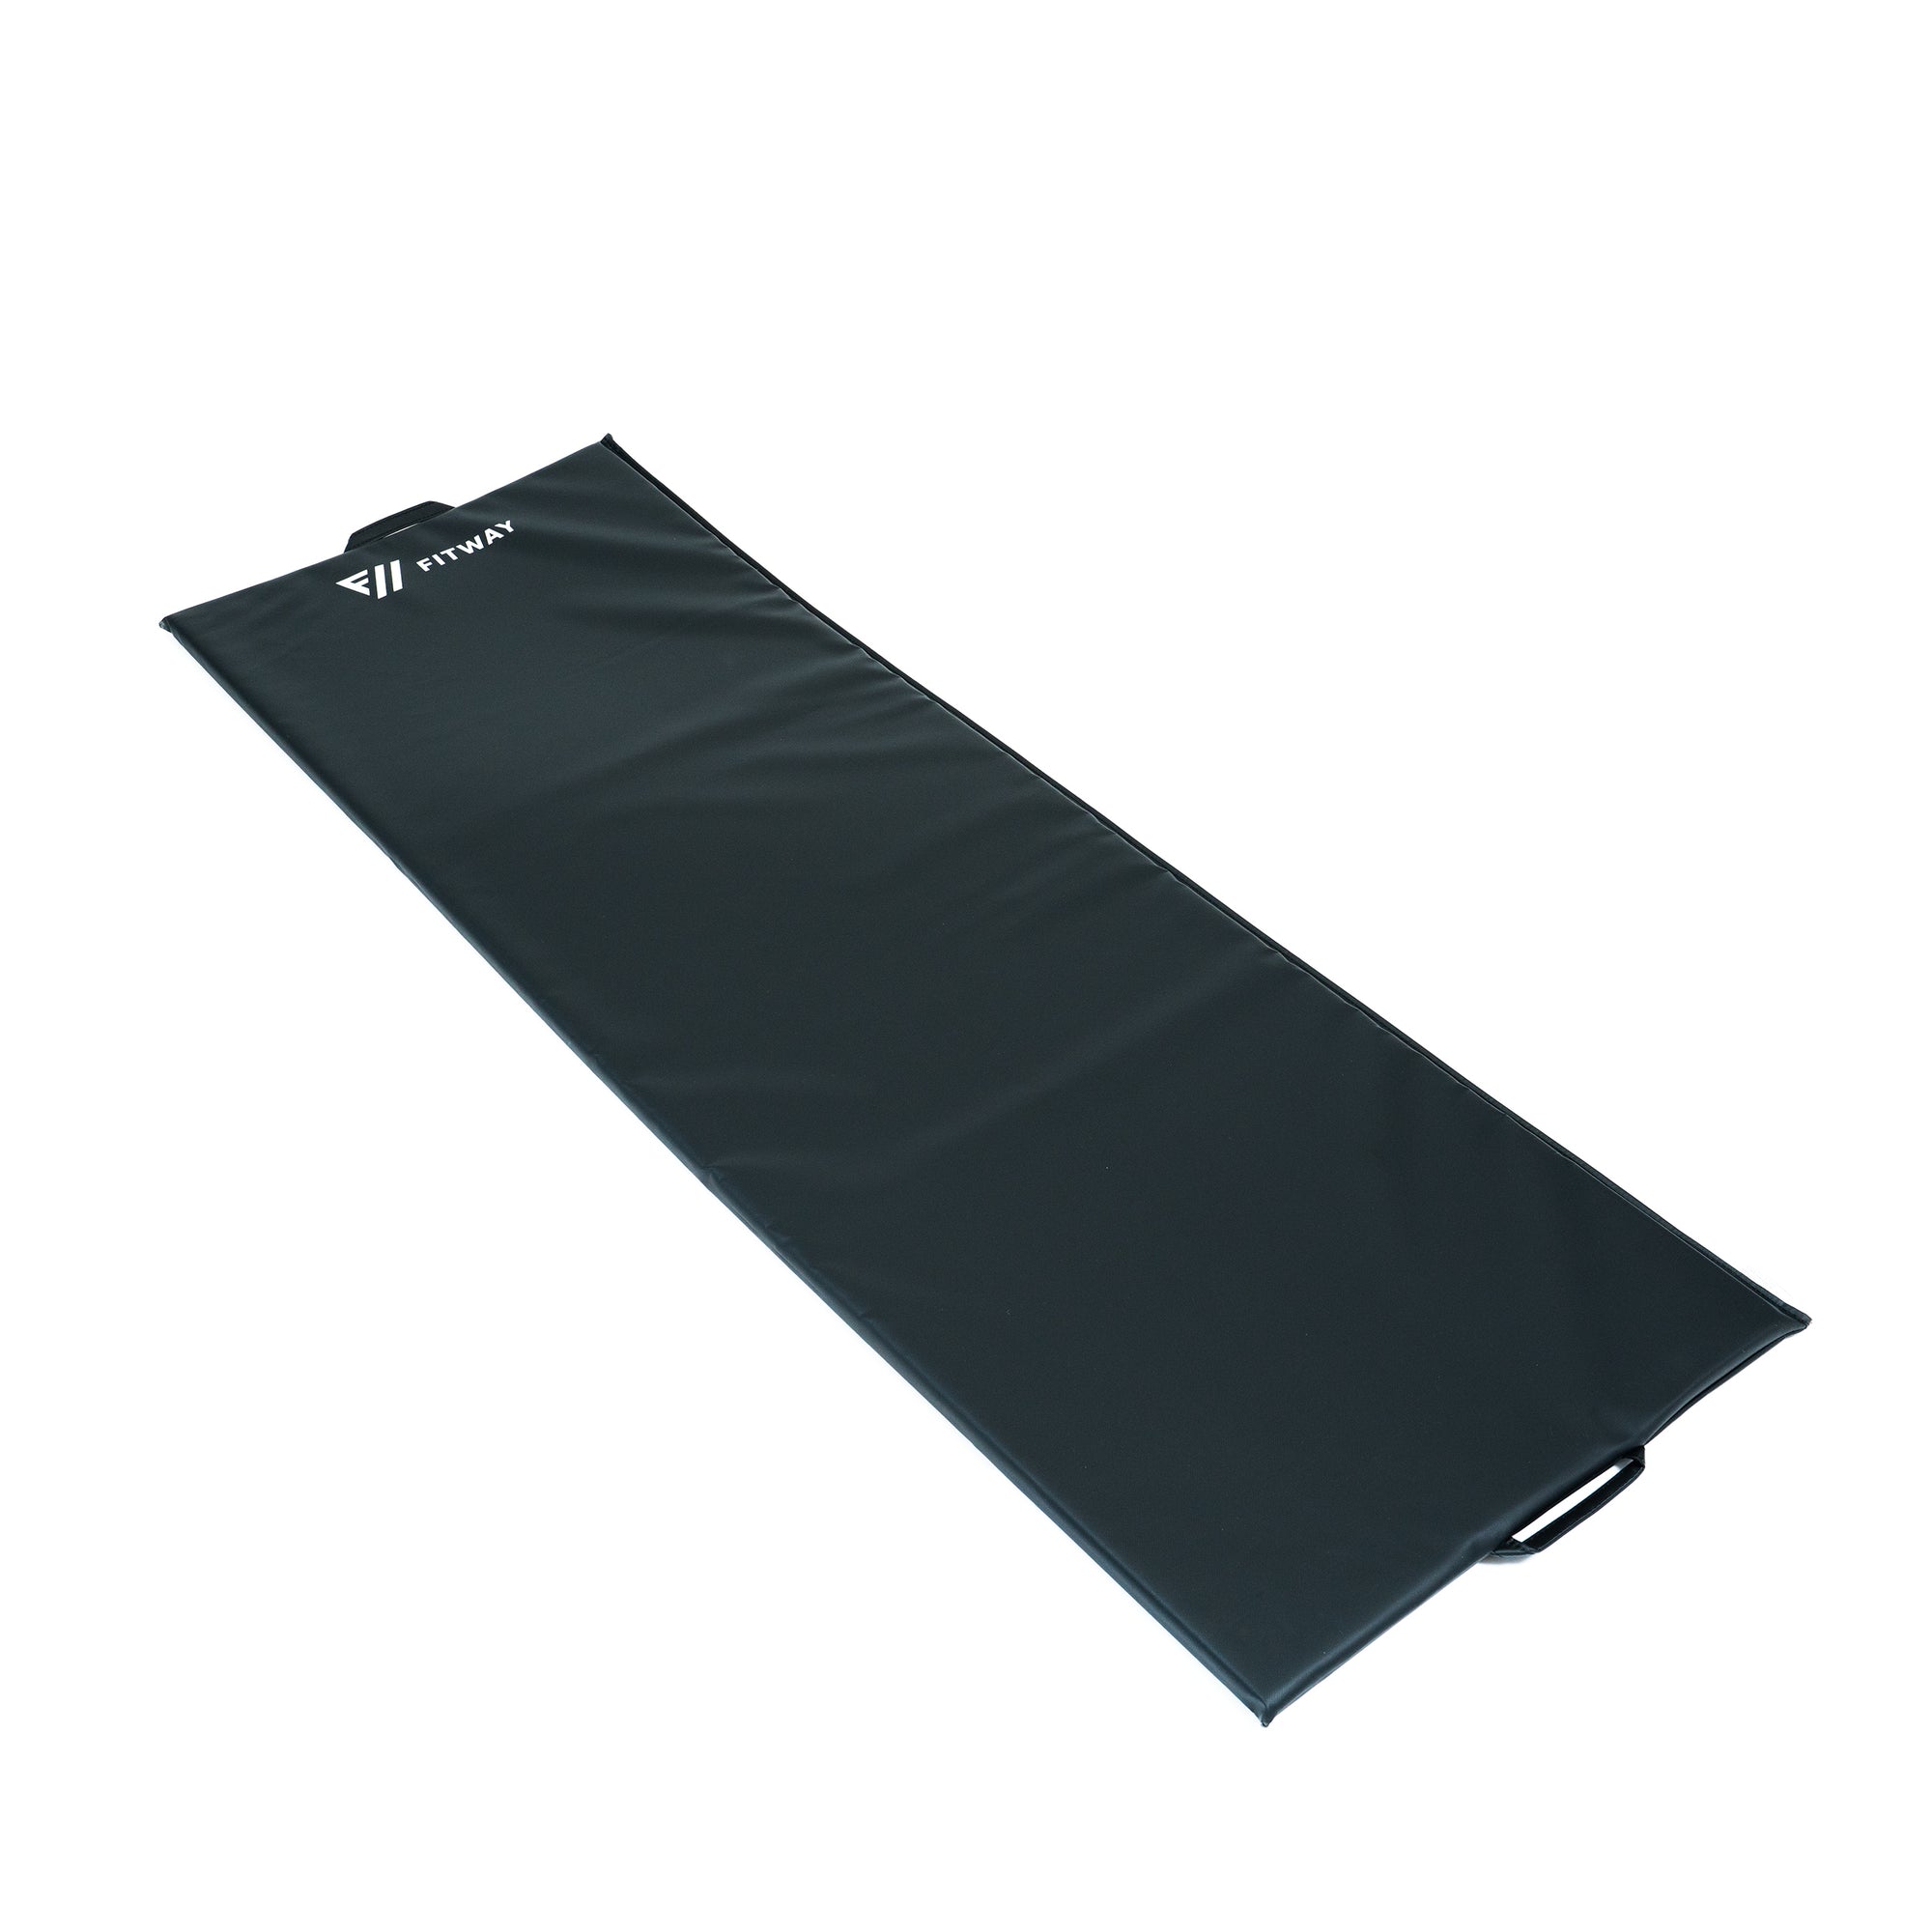 FitWay Equip. 6’ Fitness Mat 